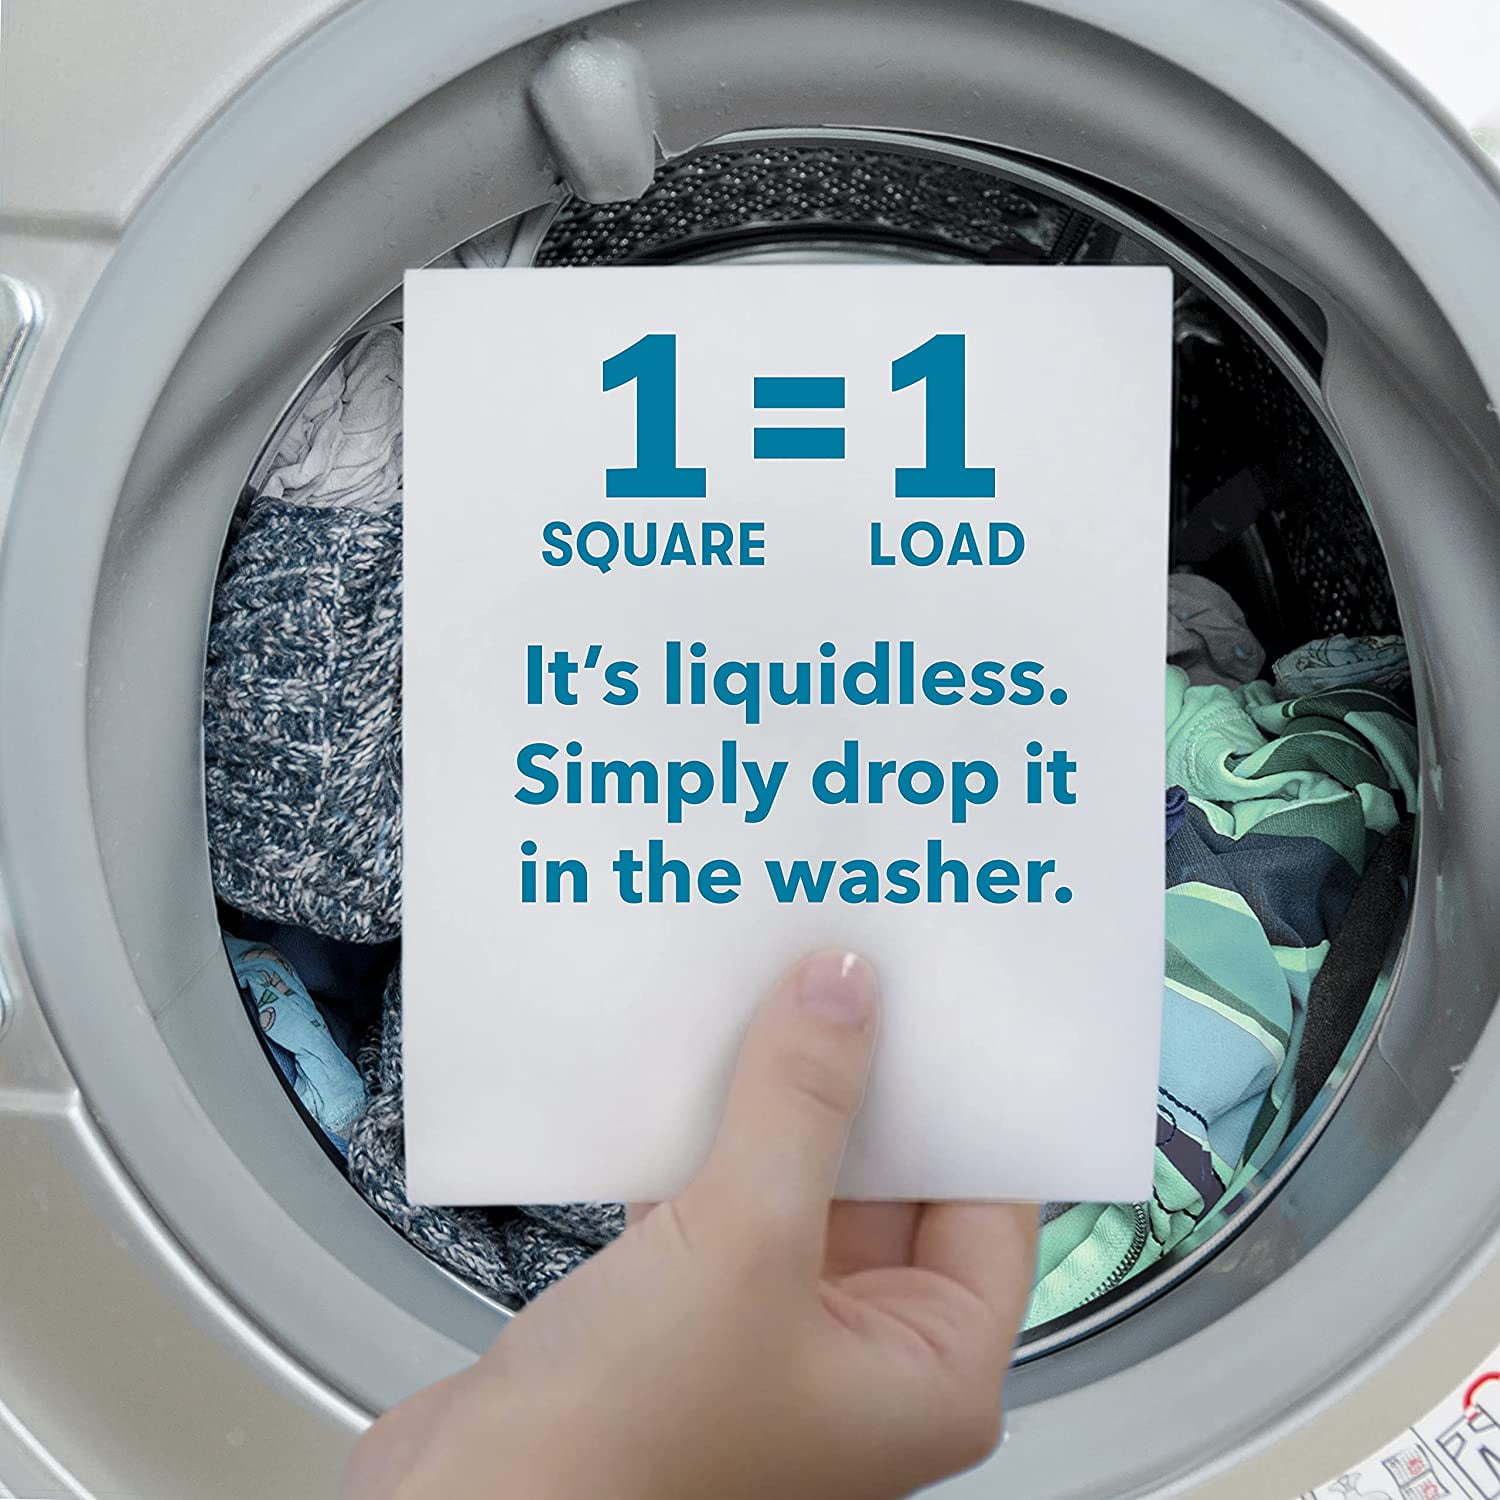 50 Sheets Eco-friendly Ultra Concentrated Laundry Detergent For Washing  Machine